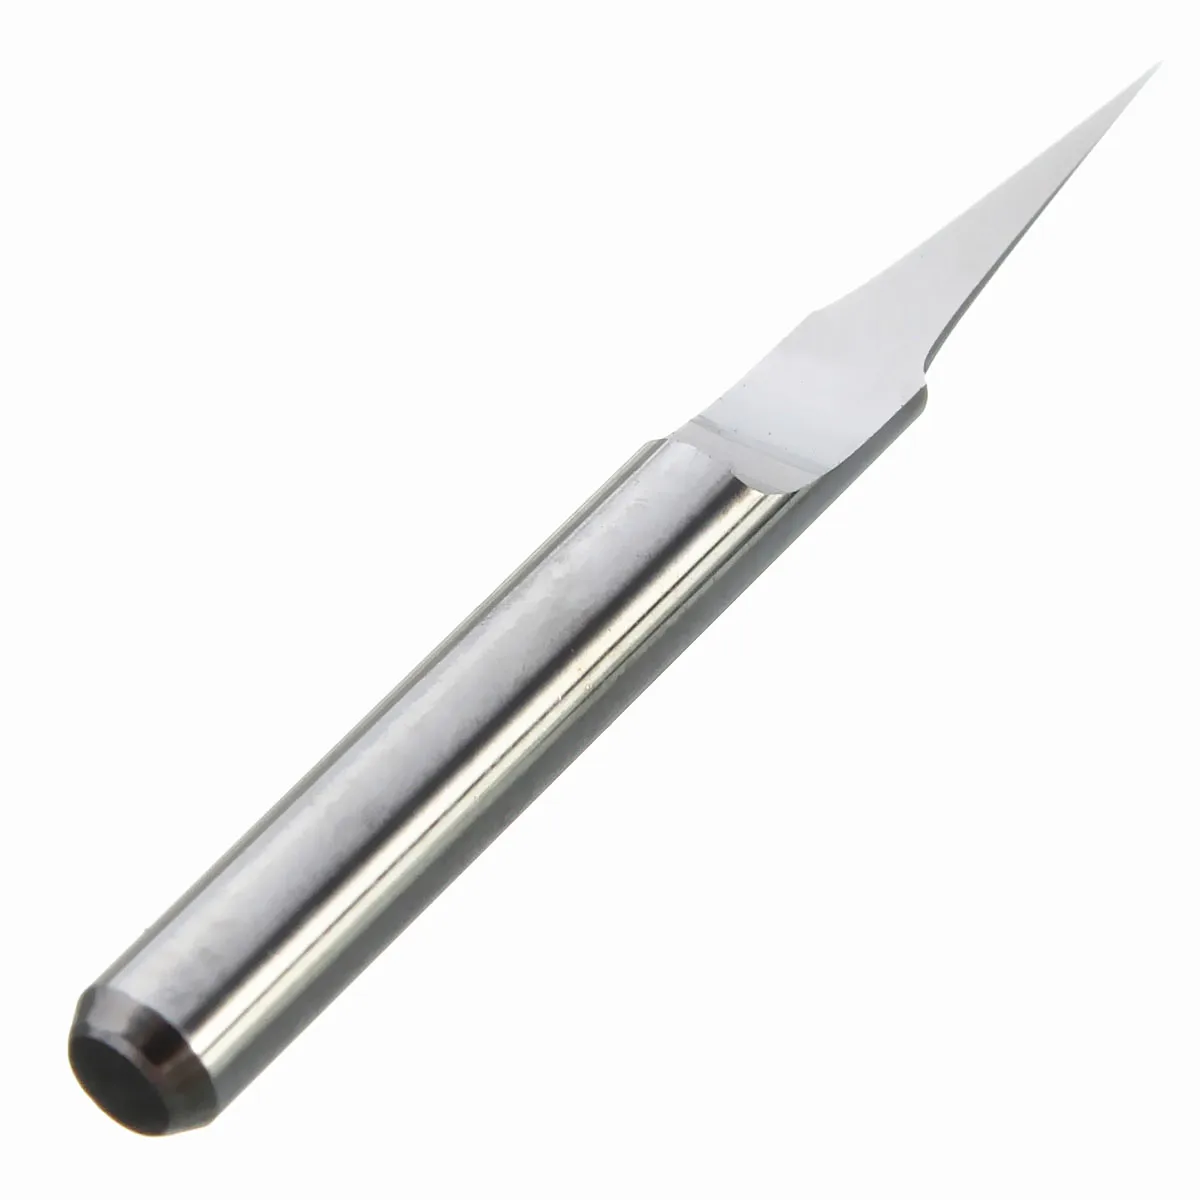 

10PC 3.175mm Diameter of The Handle 10 Degree 0.1mm V Shape Carbide PCB Engraving Bits CNC Router Bit Tool Milling Cutters